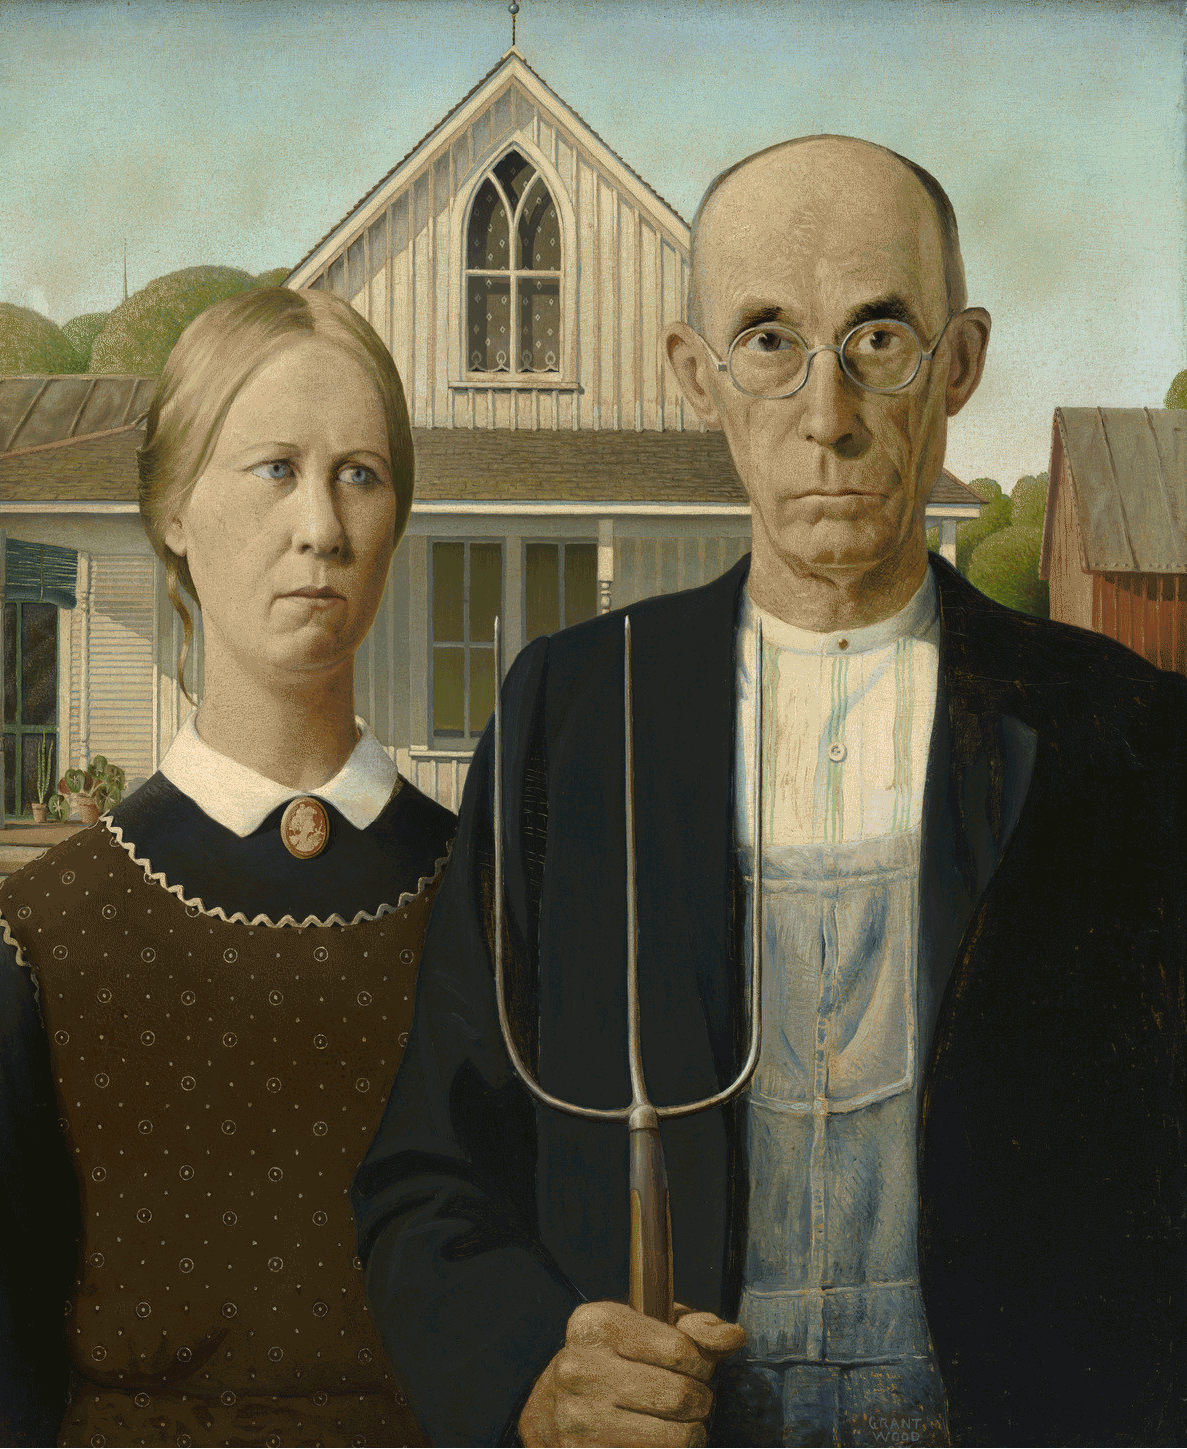 GRANT WOOD_AMERICAN GOTHIC. RE-YMAGINED Project by YMAGES. Famous painting recreated in 3D.